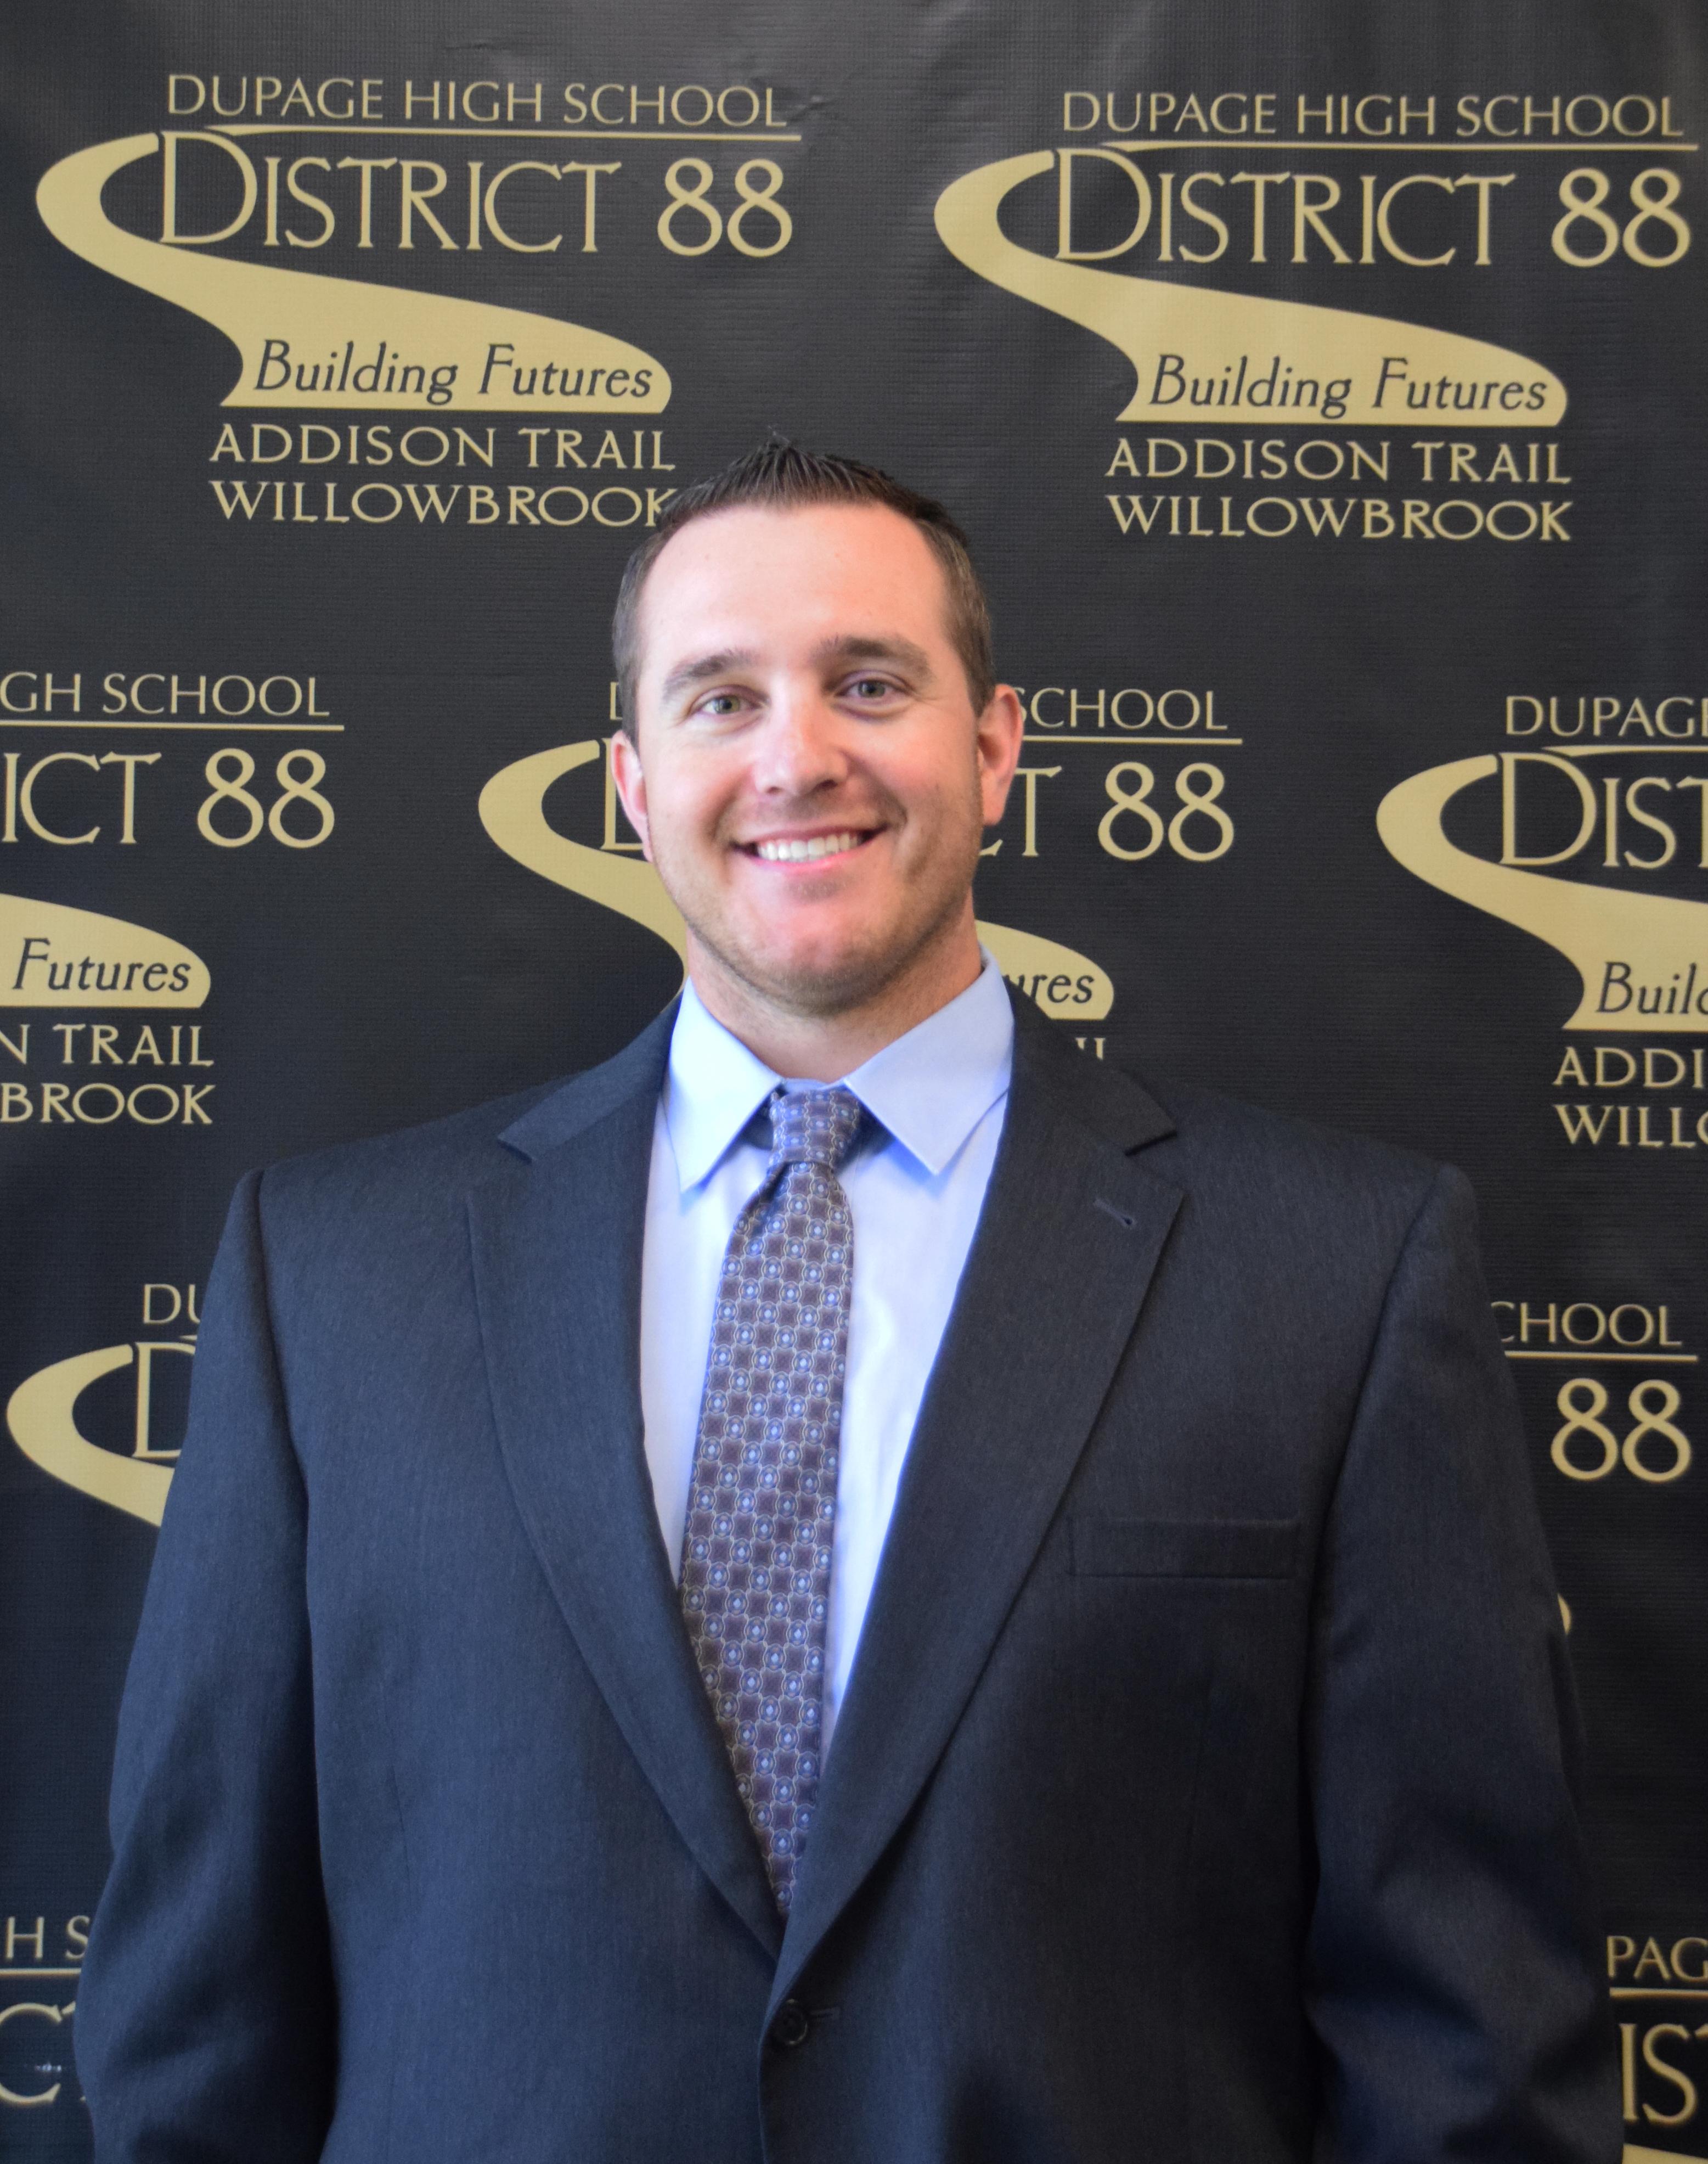 District 88 appoints Director of Business Services as Chief Financial Officer, effective July 1, 2023